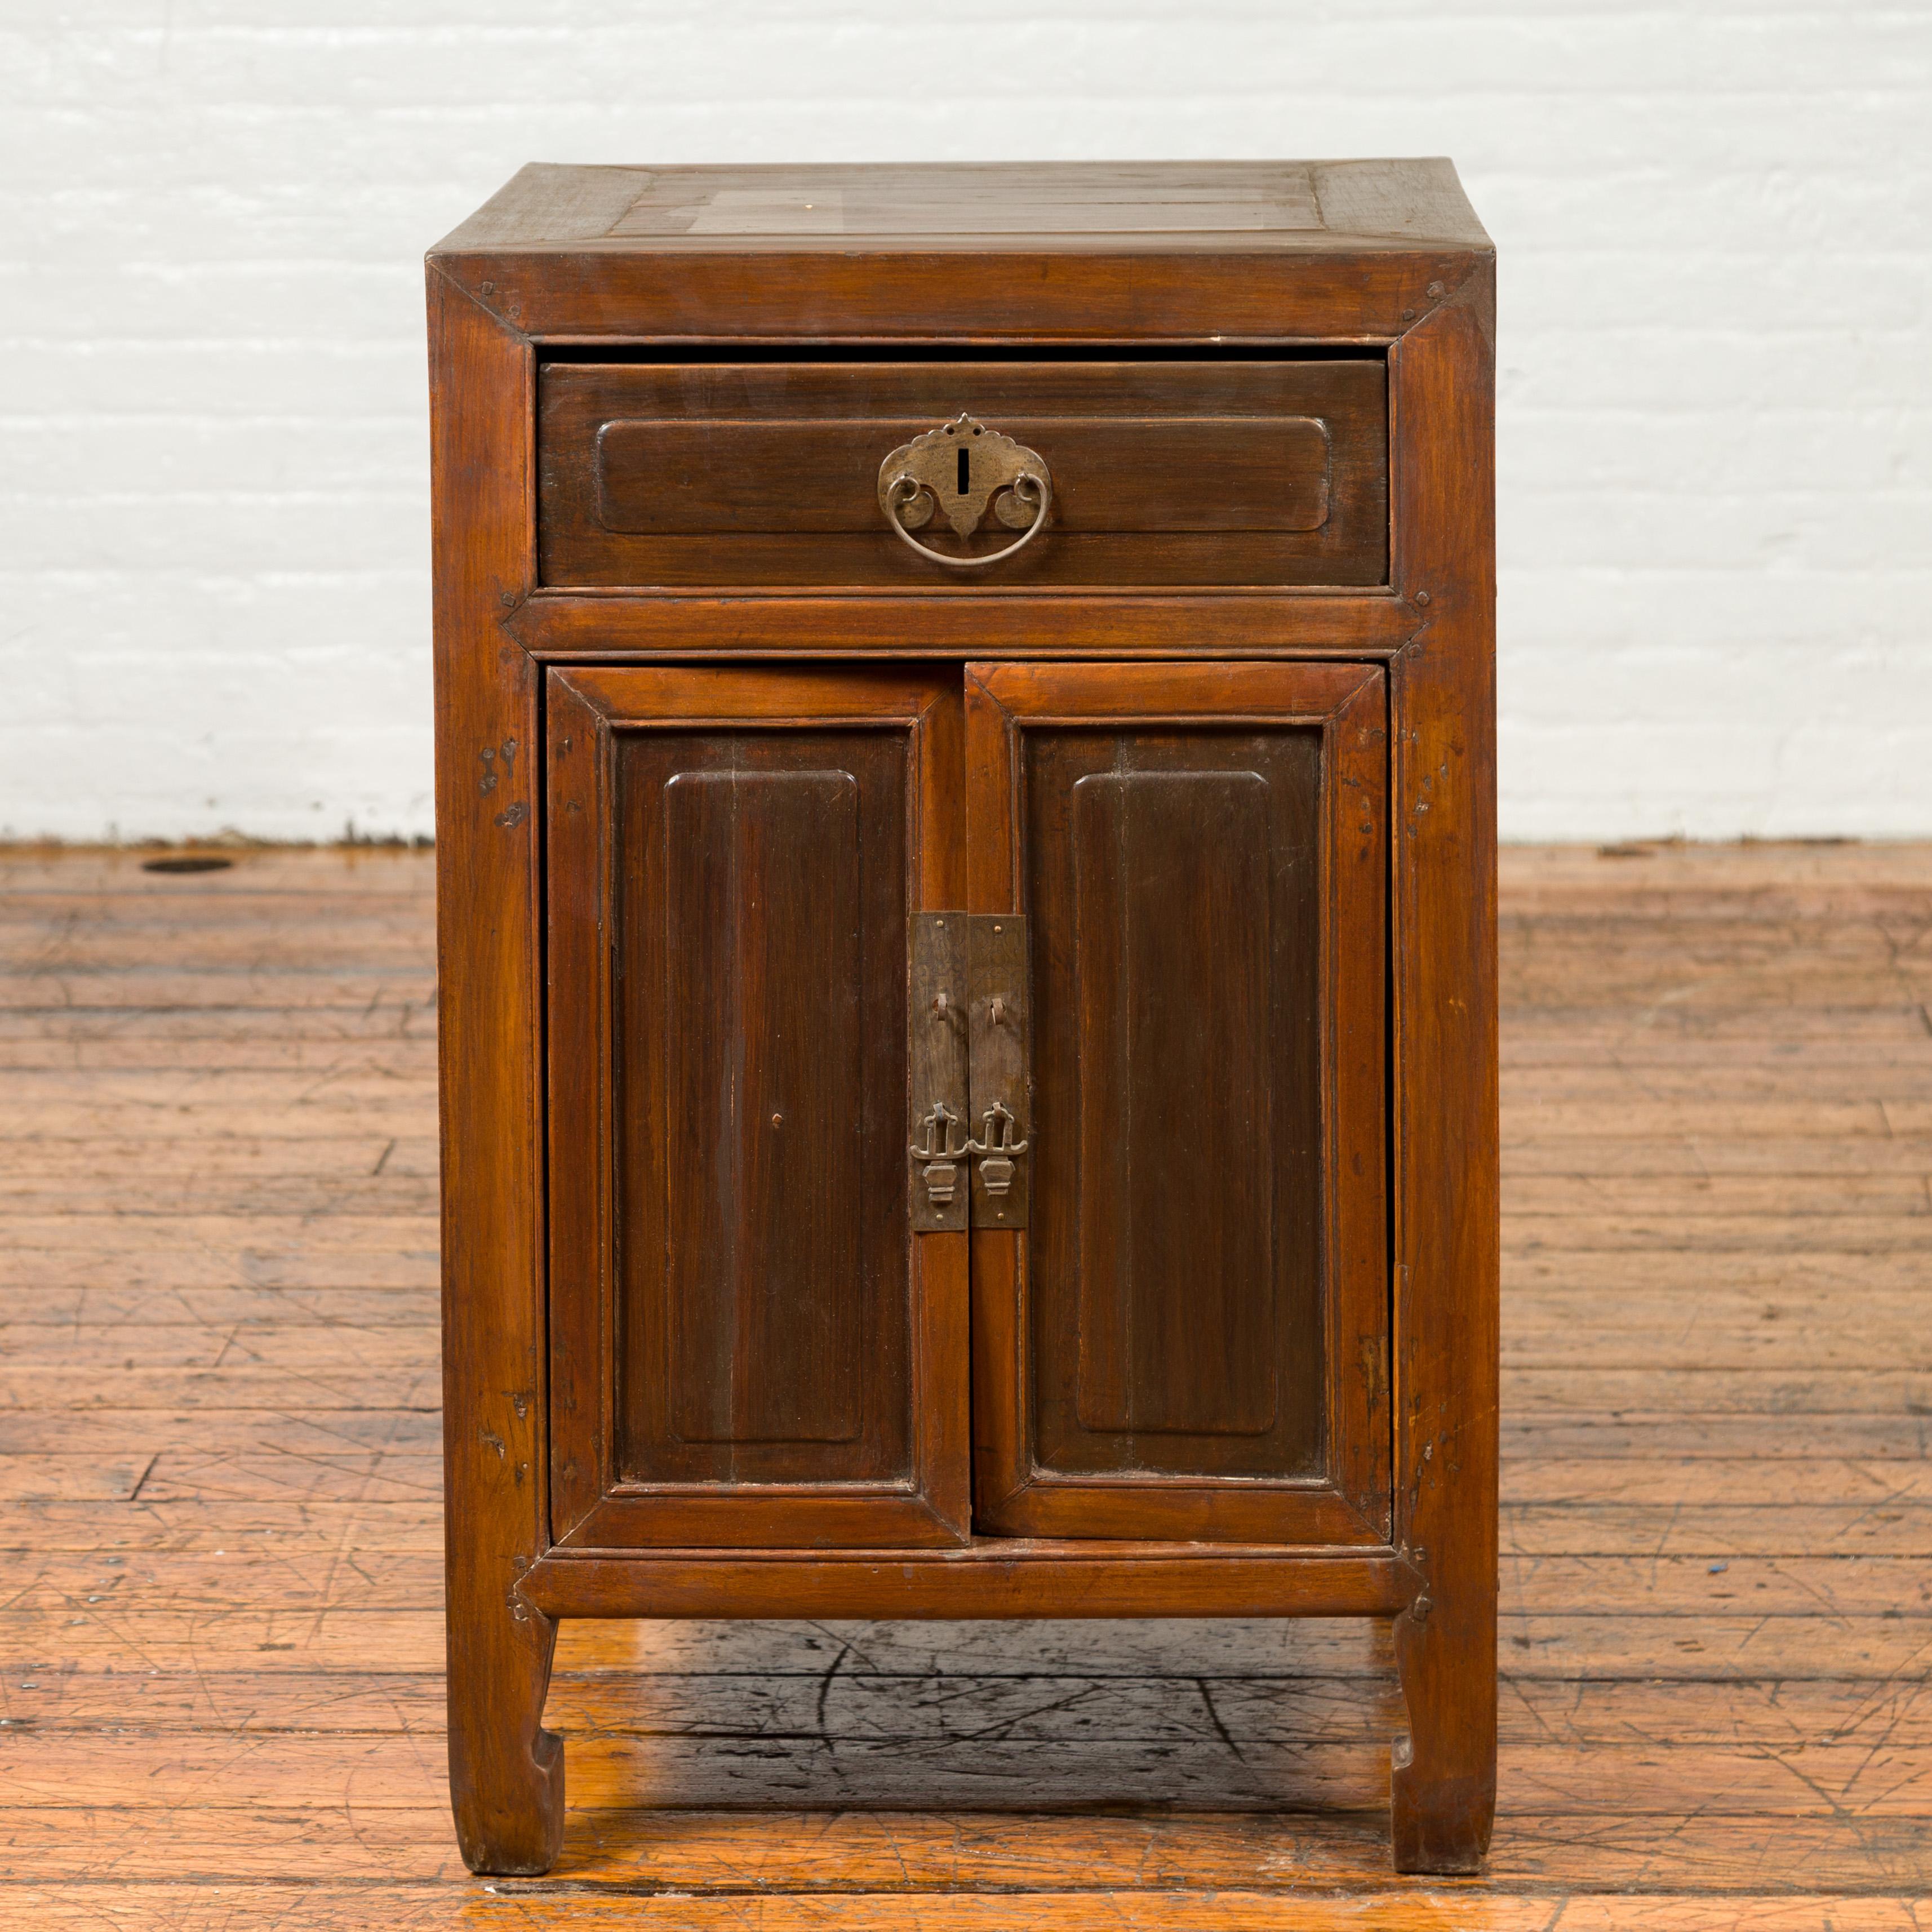 A vintage side chest from the mid-20th century, with horse hoof feet and two-toned finish. This mid-century vintage side chest exemplifies a blend of functionality and aesthetic charm. Crafted during the mid-20th century, this piece features a